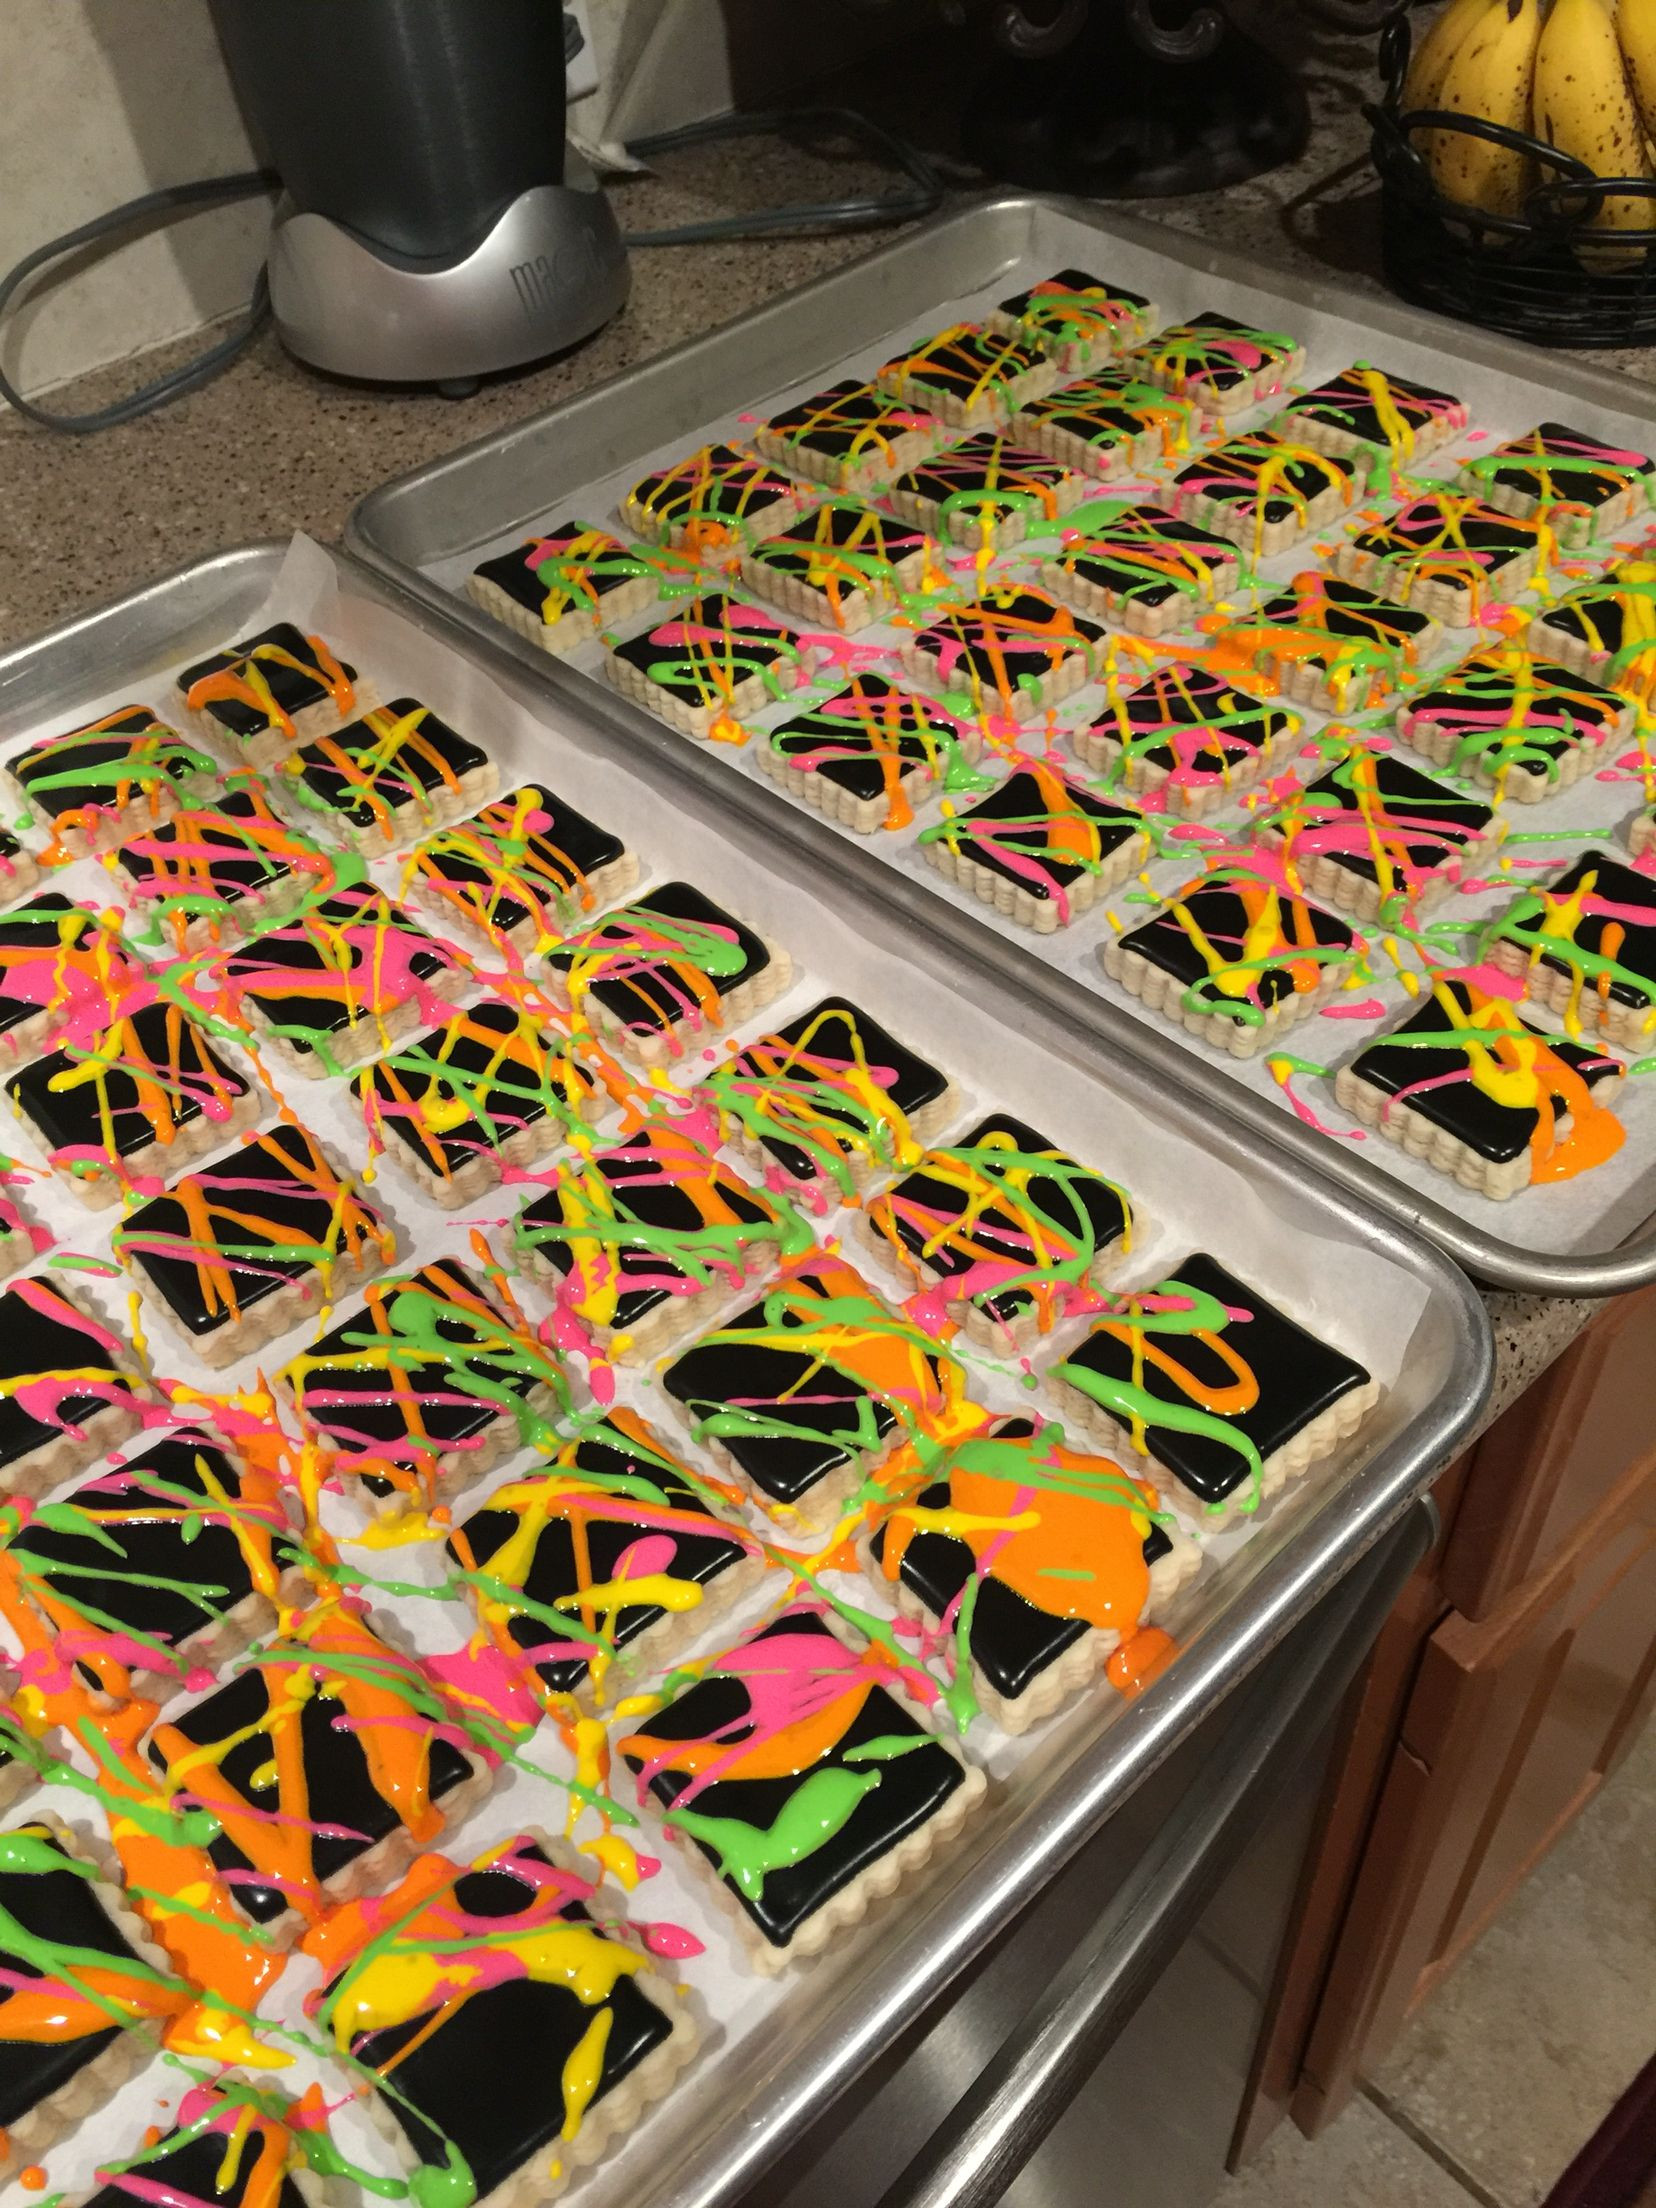 90S Party Food Ideas
 Neon Splatter Paint cookies Love how these turned out